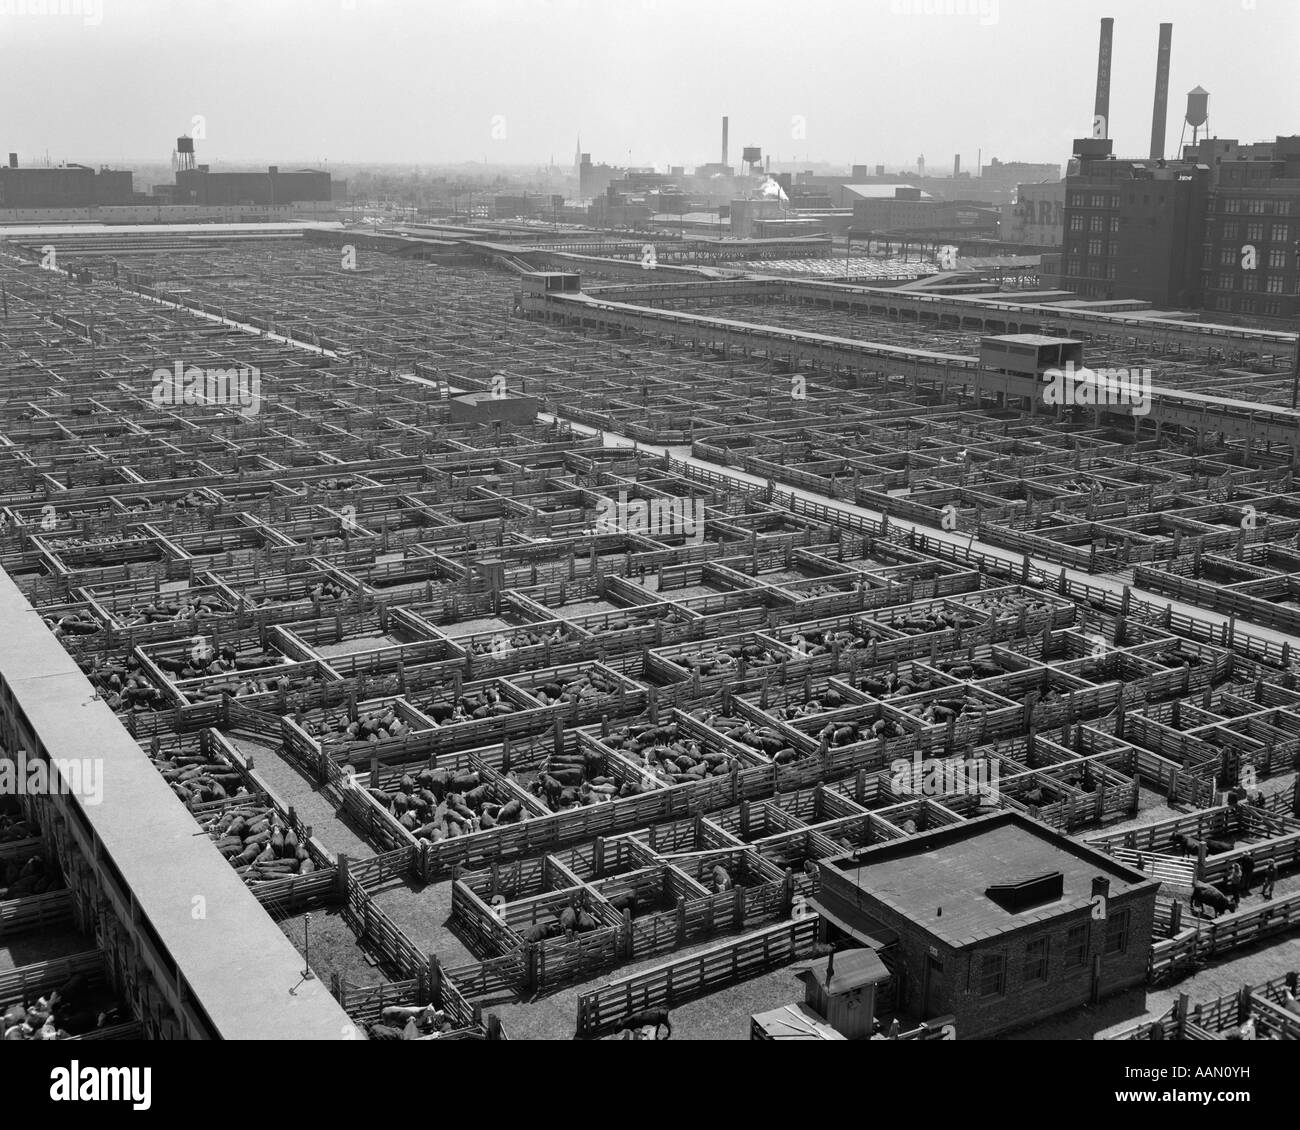 1950s CHICAGO STOCKYARDS AERIAL VIEW CATTLE PENS Stock Photo